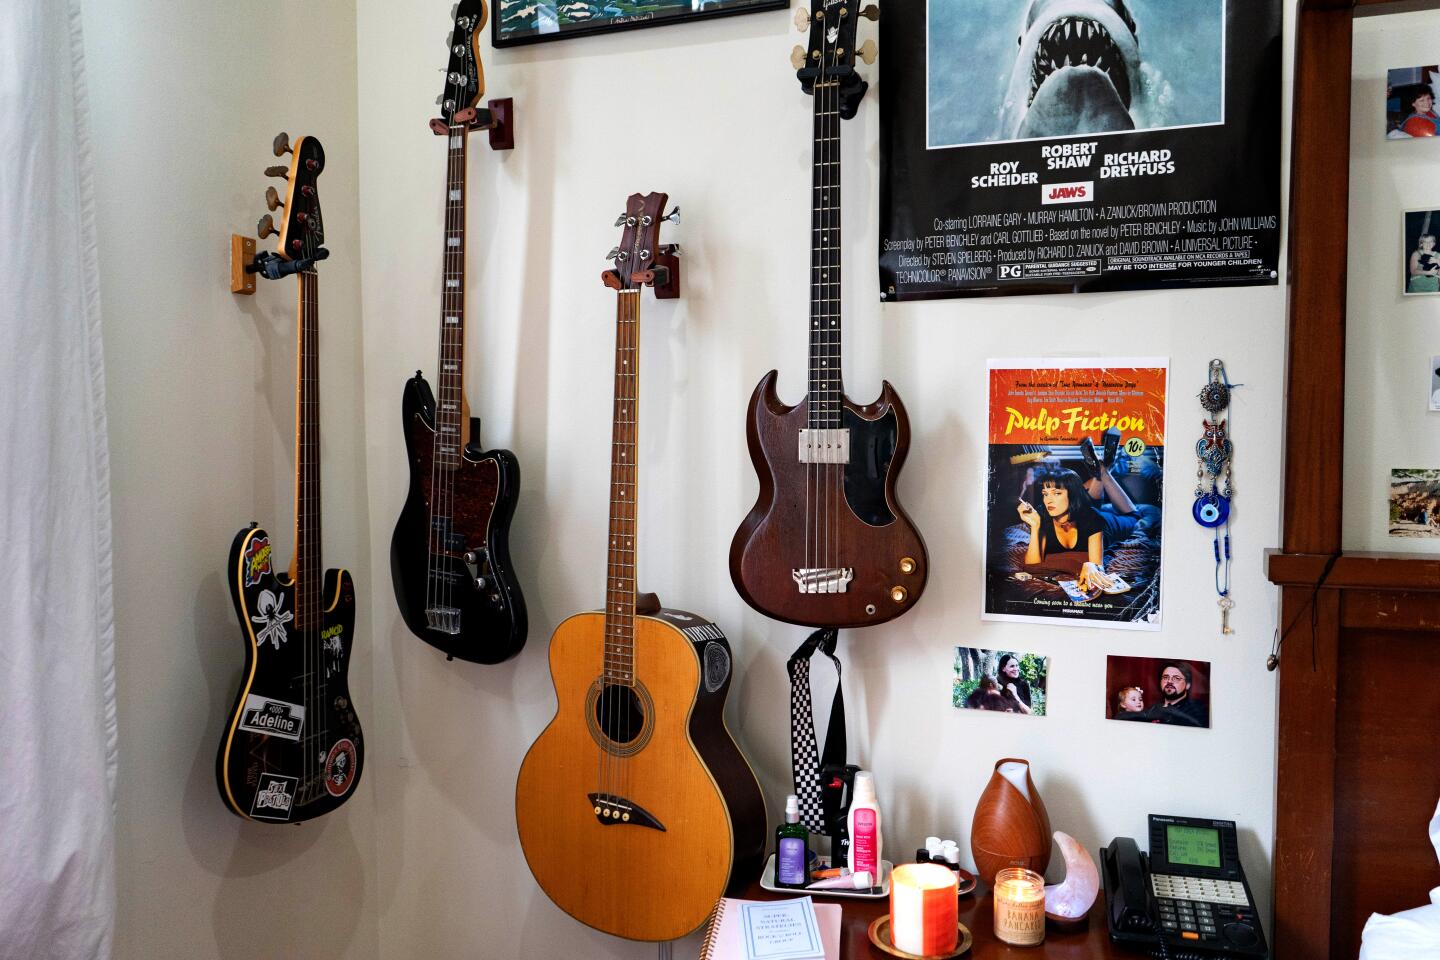 Guitars hang from the walls, alongside vintage posters of “Jaws” and “Pulp Fiction,” and ads for Space Mountain and Snow White’s Adventures at Fantasyland.